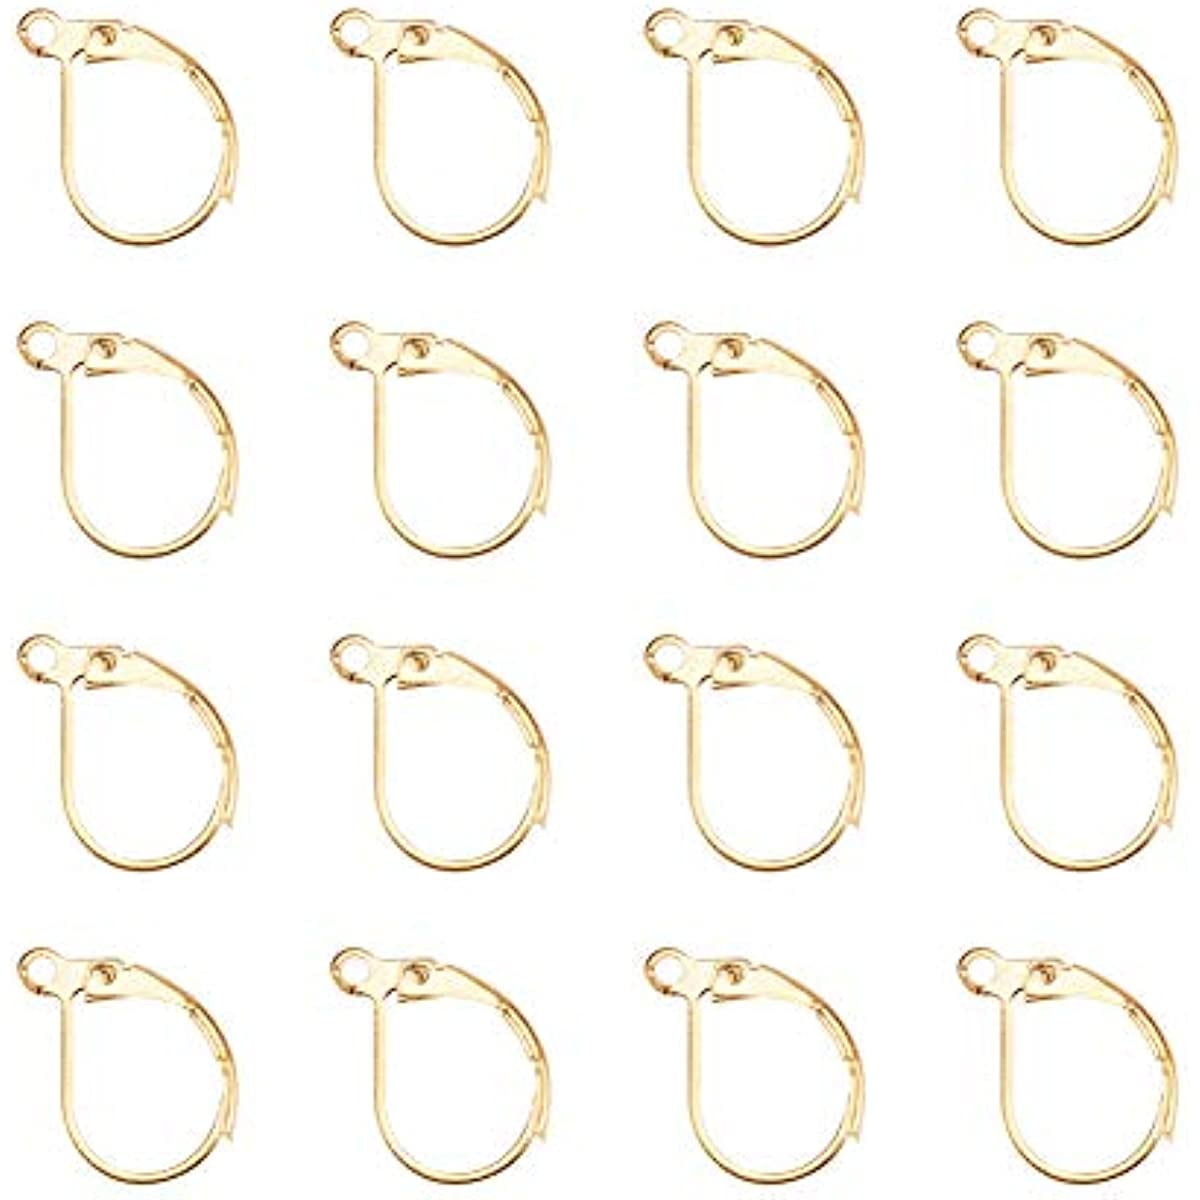  Ciieeo 24Pcs Chain Link Trigger Spring O Ring Round